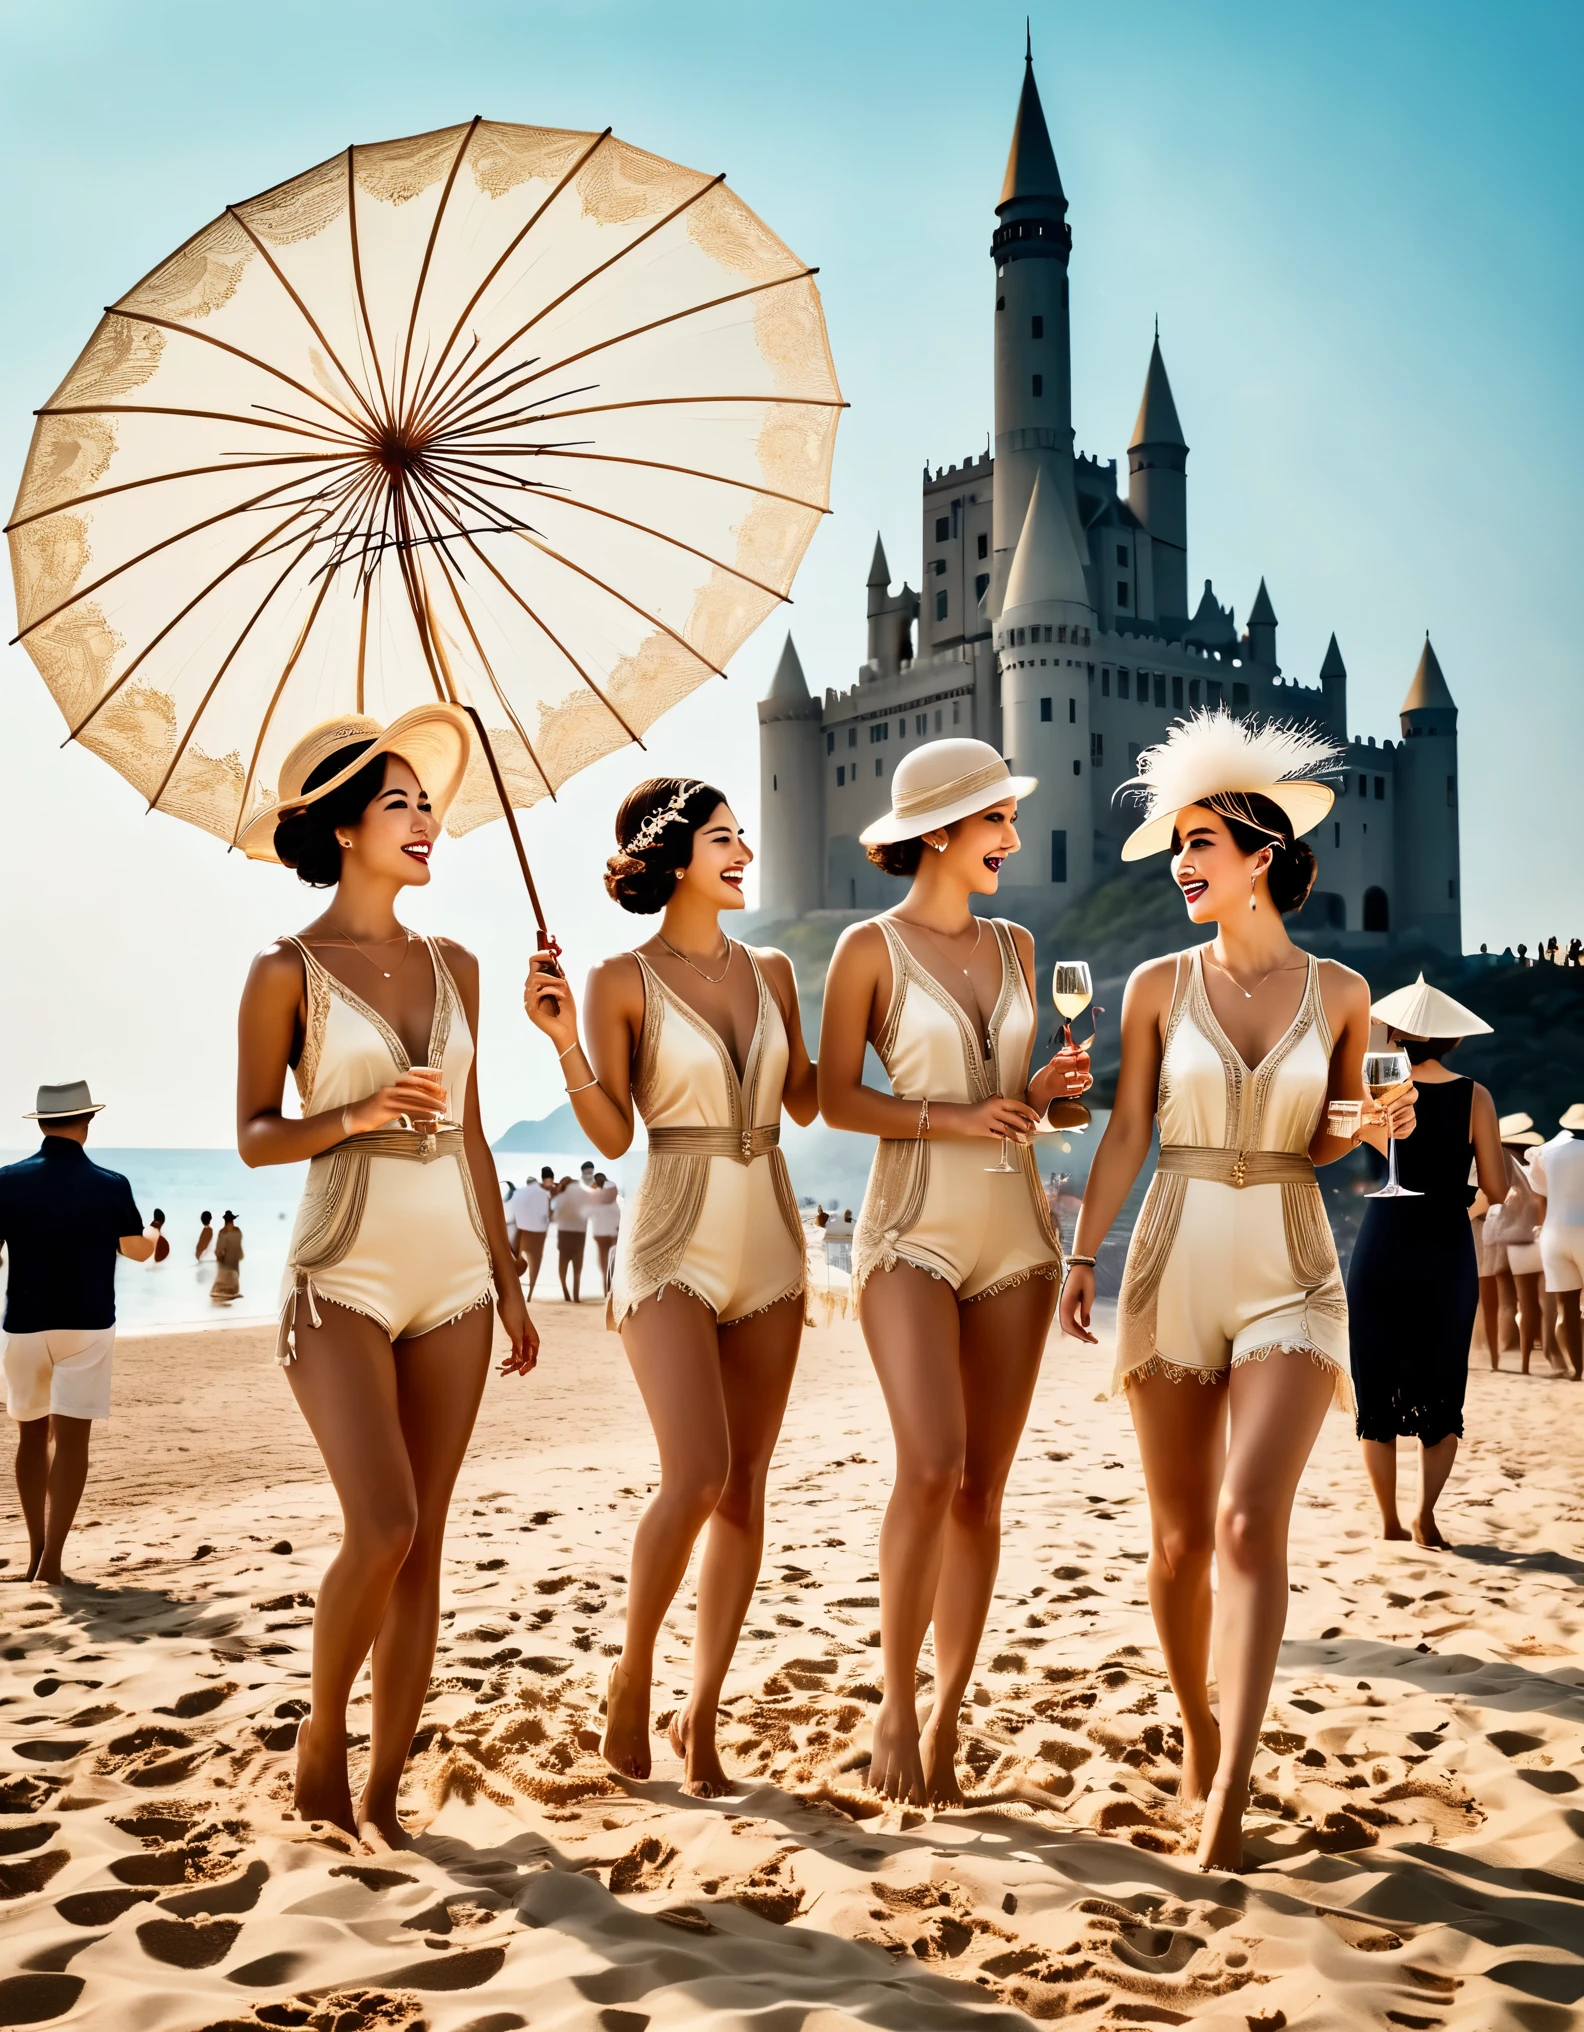 Vintage photography style, art deco style，best quality,8k,high resolution,super detailed，super clear，,creative style artwork,classical，（Many fashionable boys and girls partying on the beach），（Warm and lively  atmosphere），wine glass，High-end wineware，crazy playing，in this joyful scene，There is laughter from time to time、The sound of waves and music intertwined，Create a lazy yet energetic atmosphere。some people playing with sand on the beach，Building a magnificent sandcastle，While others lay under parasols，Enjoying the rare leisure time。far away，Some brave swimmers are taking a dip in the sea，Their figures looked particularly strong and healthy under the setting sun.。many musical instruments，Bunting，fireworks，Inspired by《the great Gatsby》，The atmosphere of the 1920s, Delicate texture，smooth visible velvet，Wear pearl jewelry，Advanced custom lace clothing，（Stacking accessories），（Dressed in 1920s fashion, 1920s hairstyles, 1 9 2 0 s style, 1 9 2 0 clothes, 1 9 2 0 s fabric style,